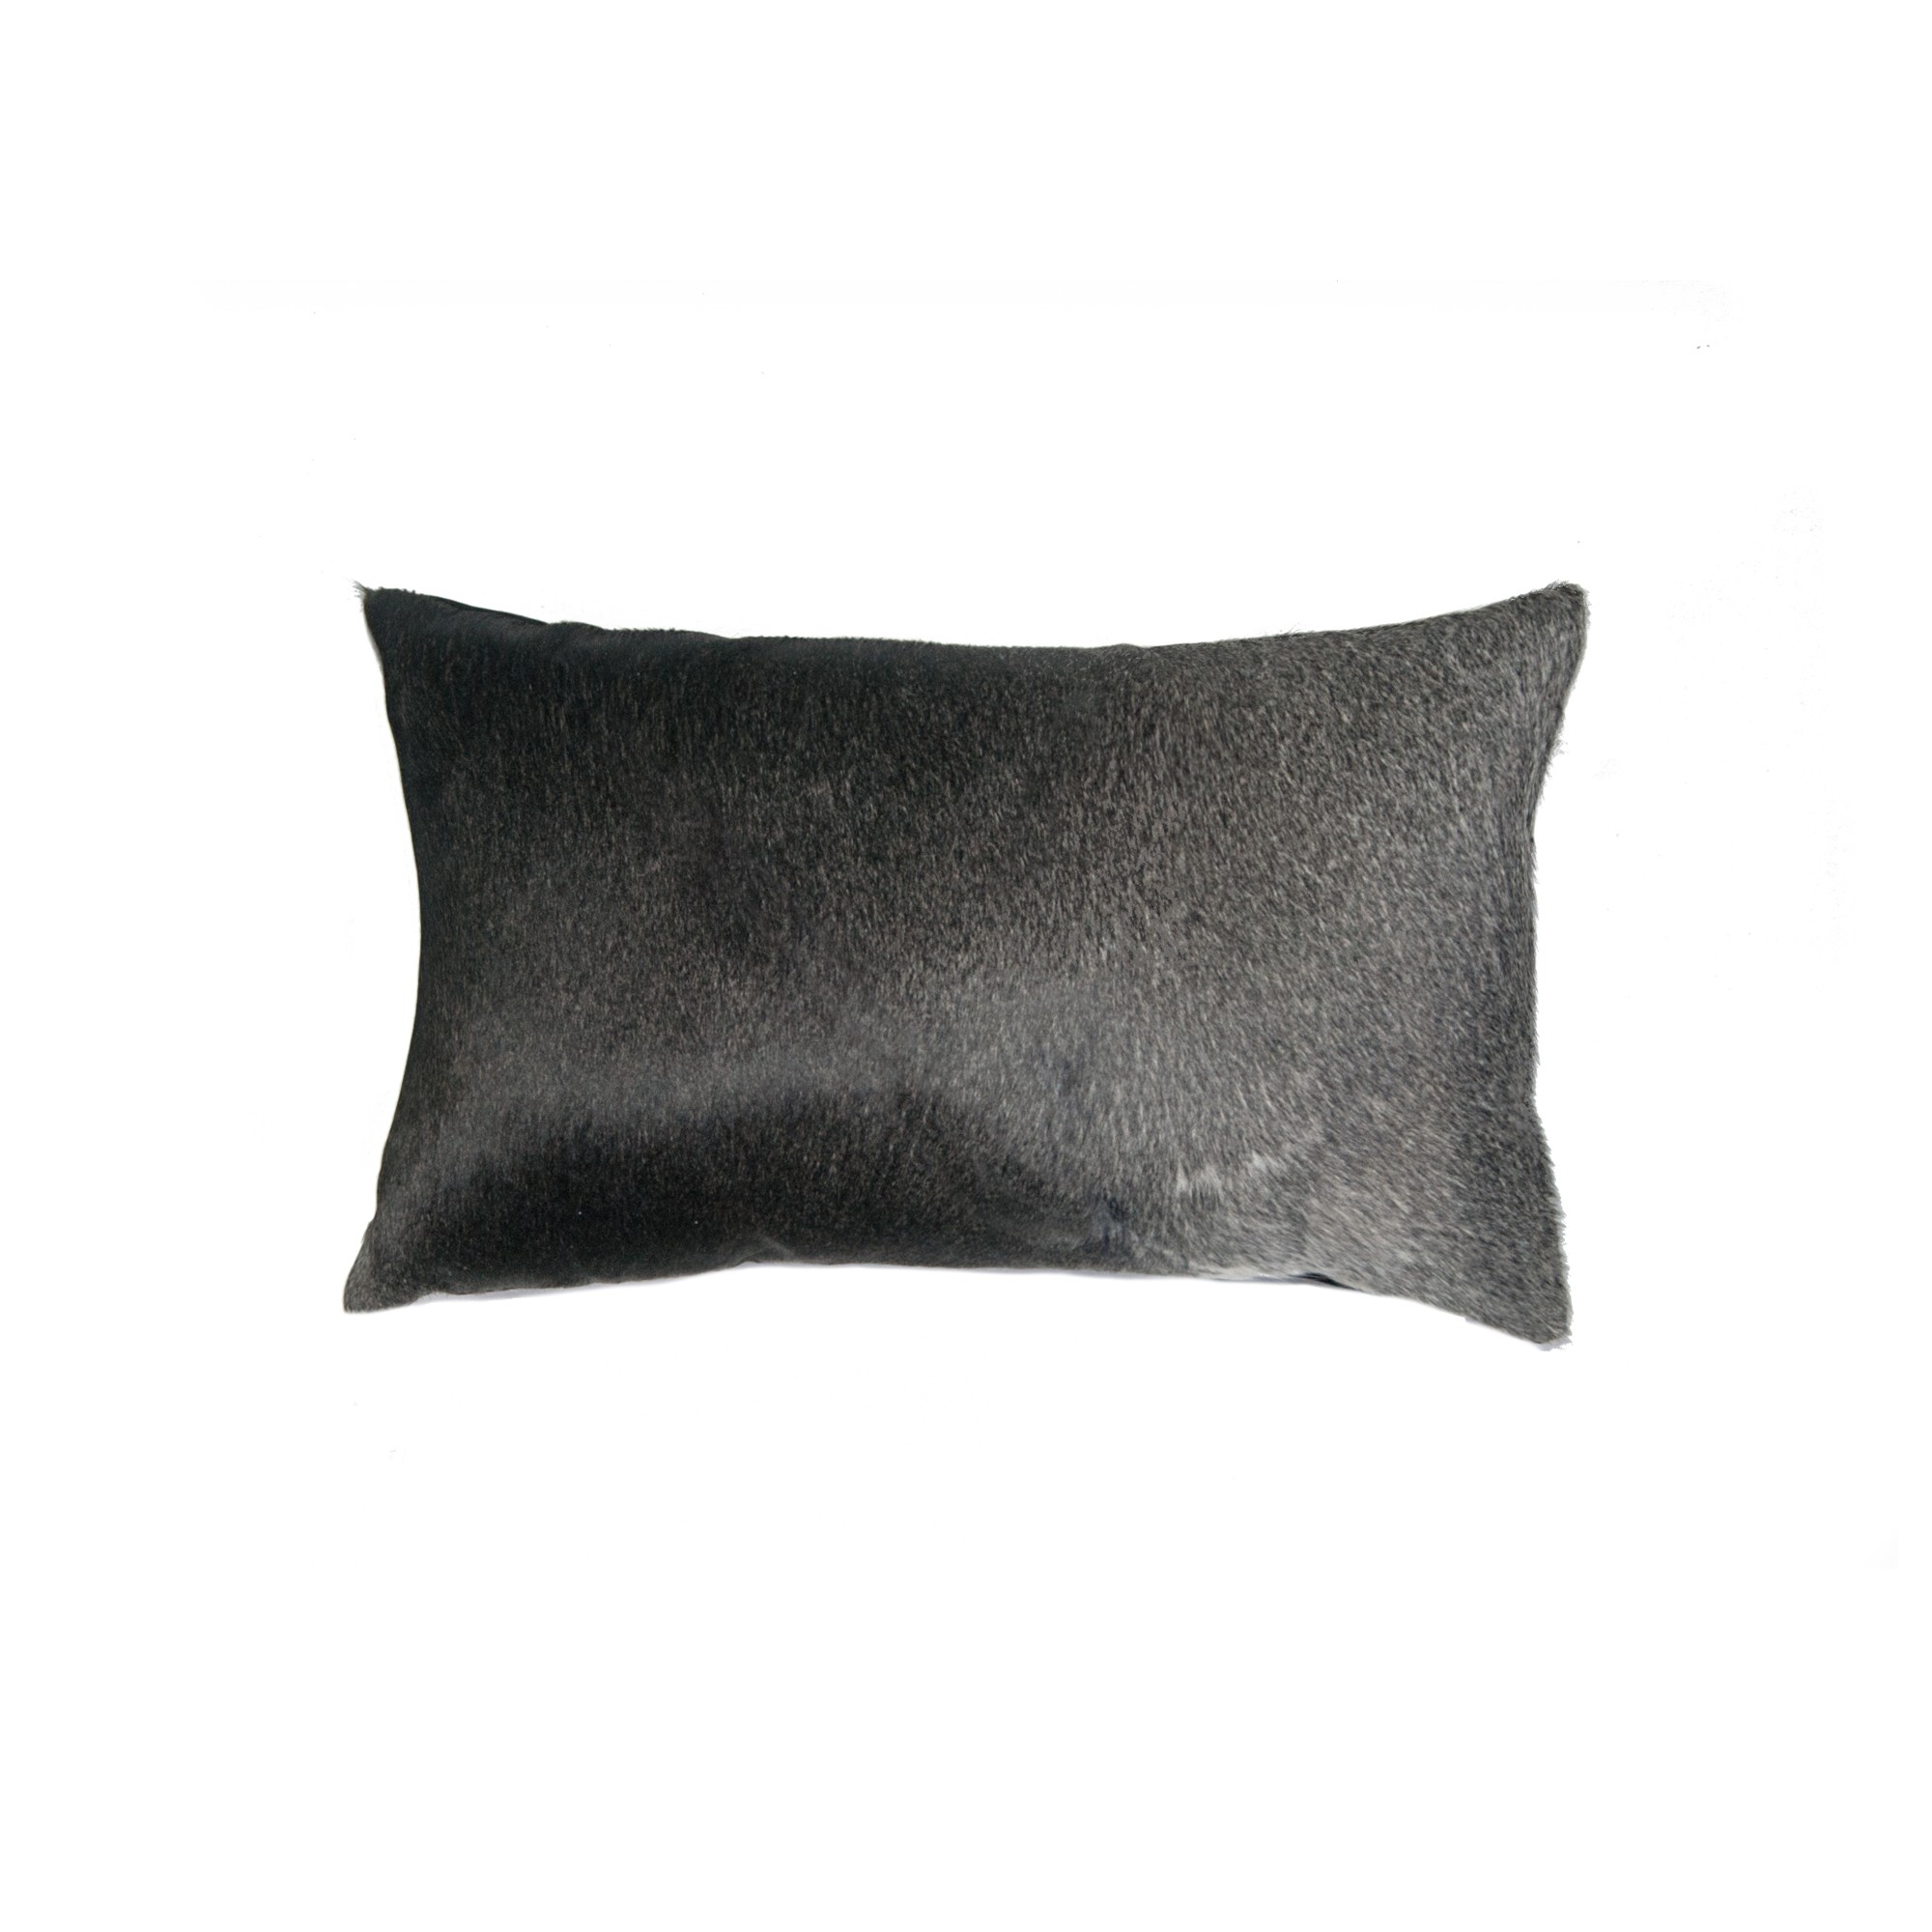 12" x 20" x 5" Gray And White Cowhide - Pillow